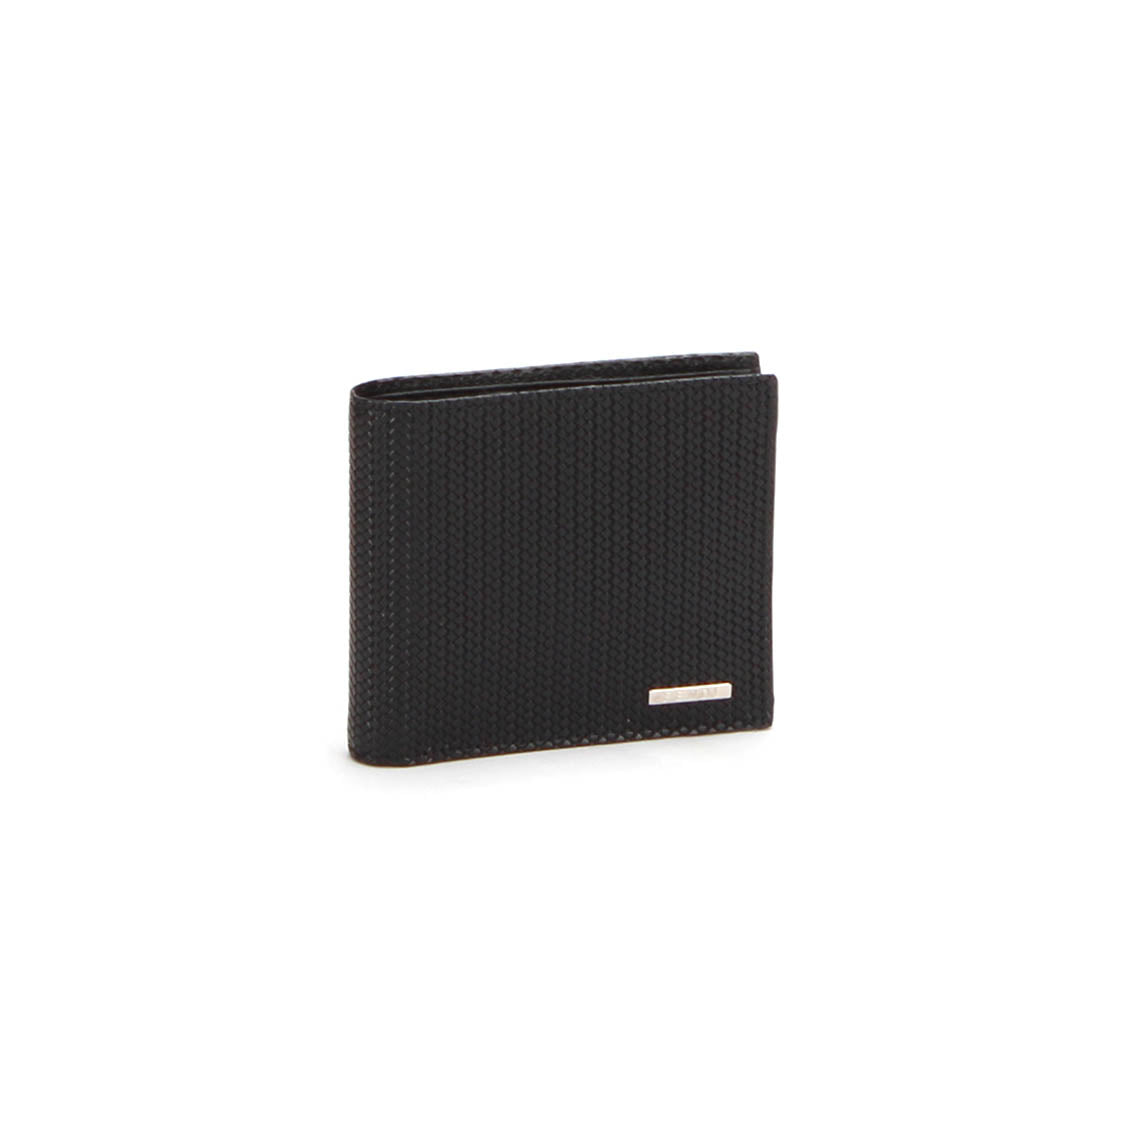 Woven Leather Bi-Fold Small Wallet